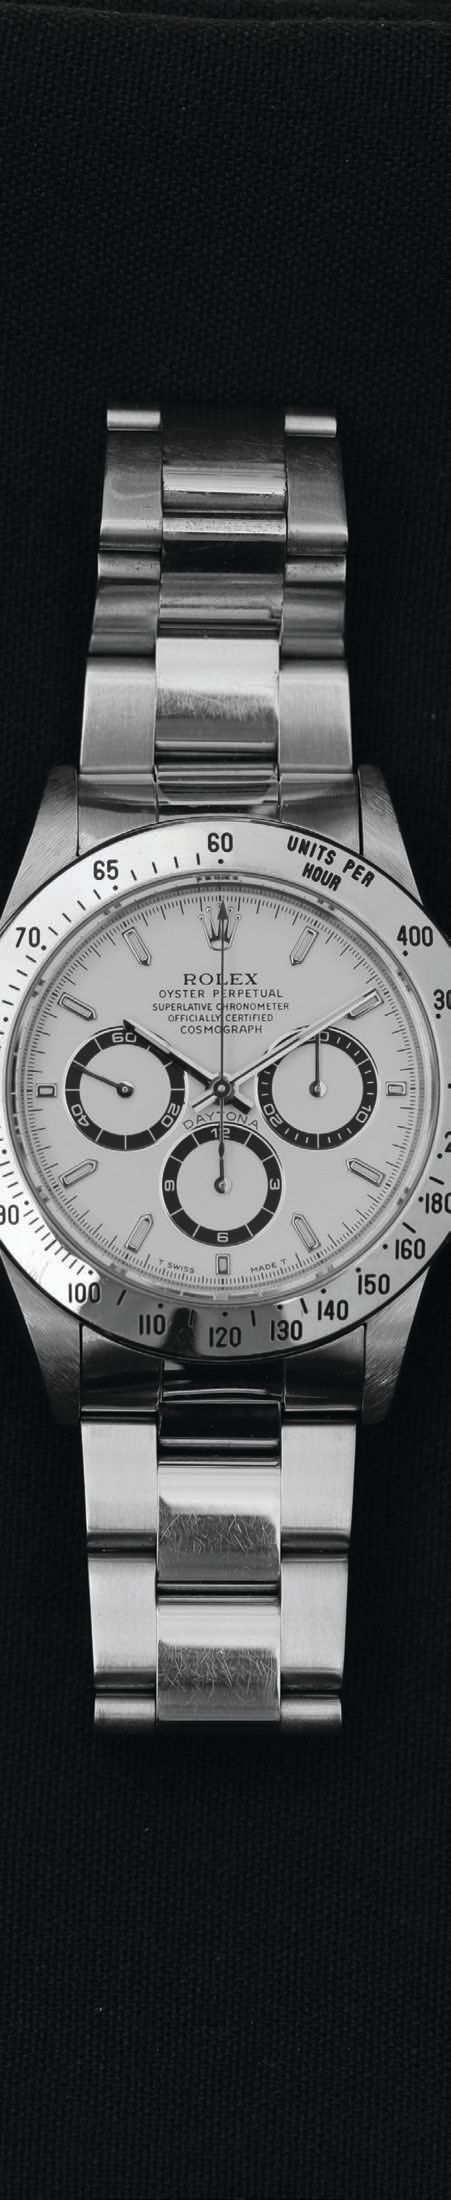 Rolex Daytona models from the '90s are fetching $30K-$40K depending on condition. PHOTO COURTESY OF BEVERLY HILLS WATCH COMPANY